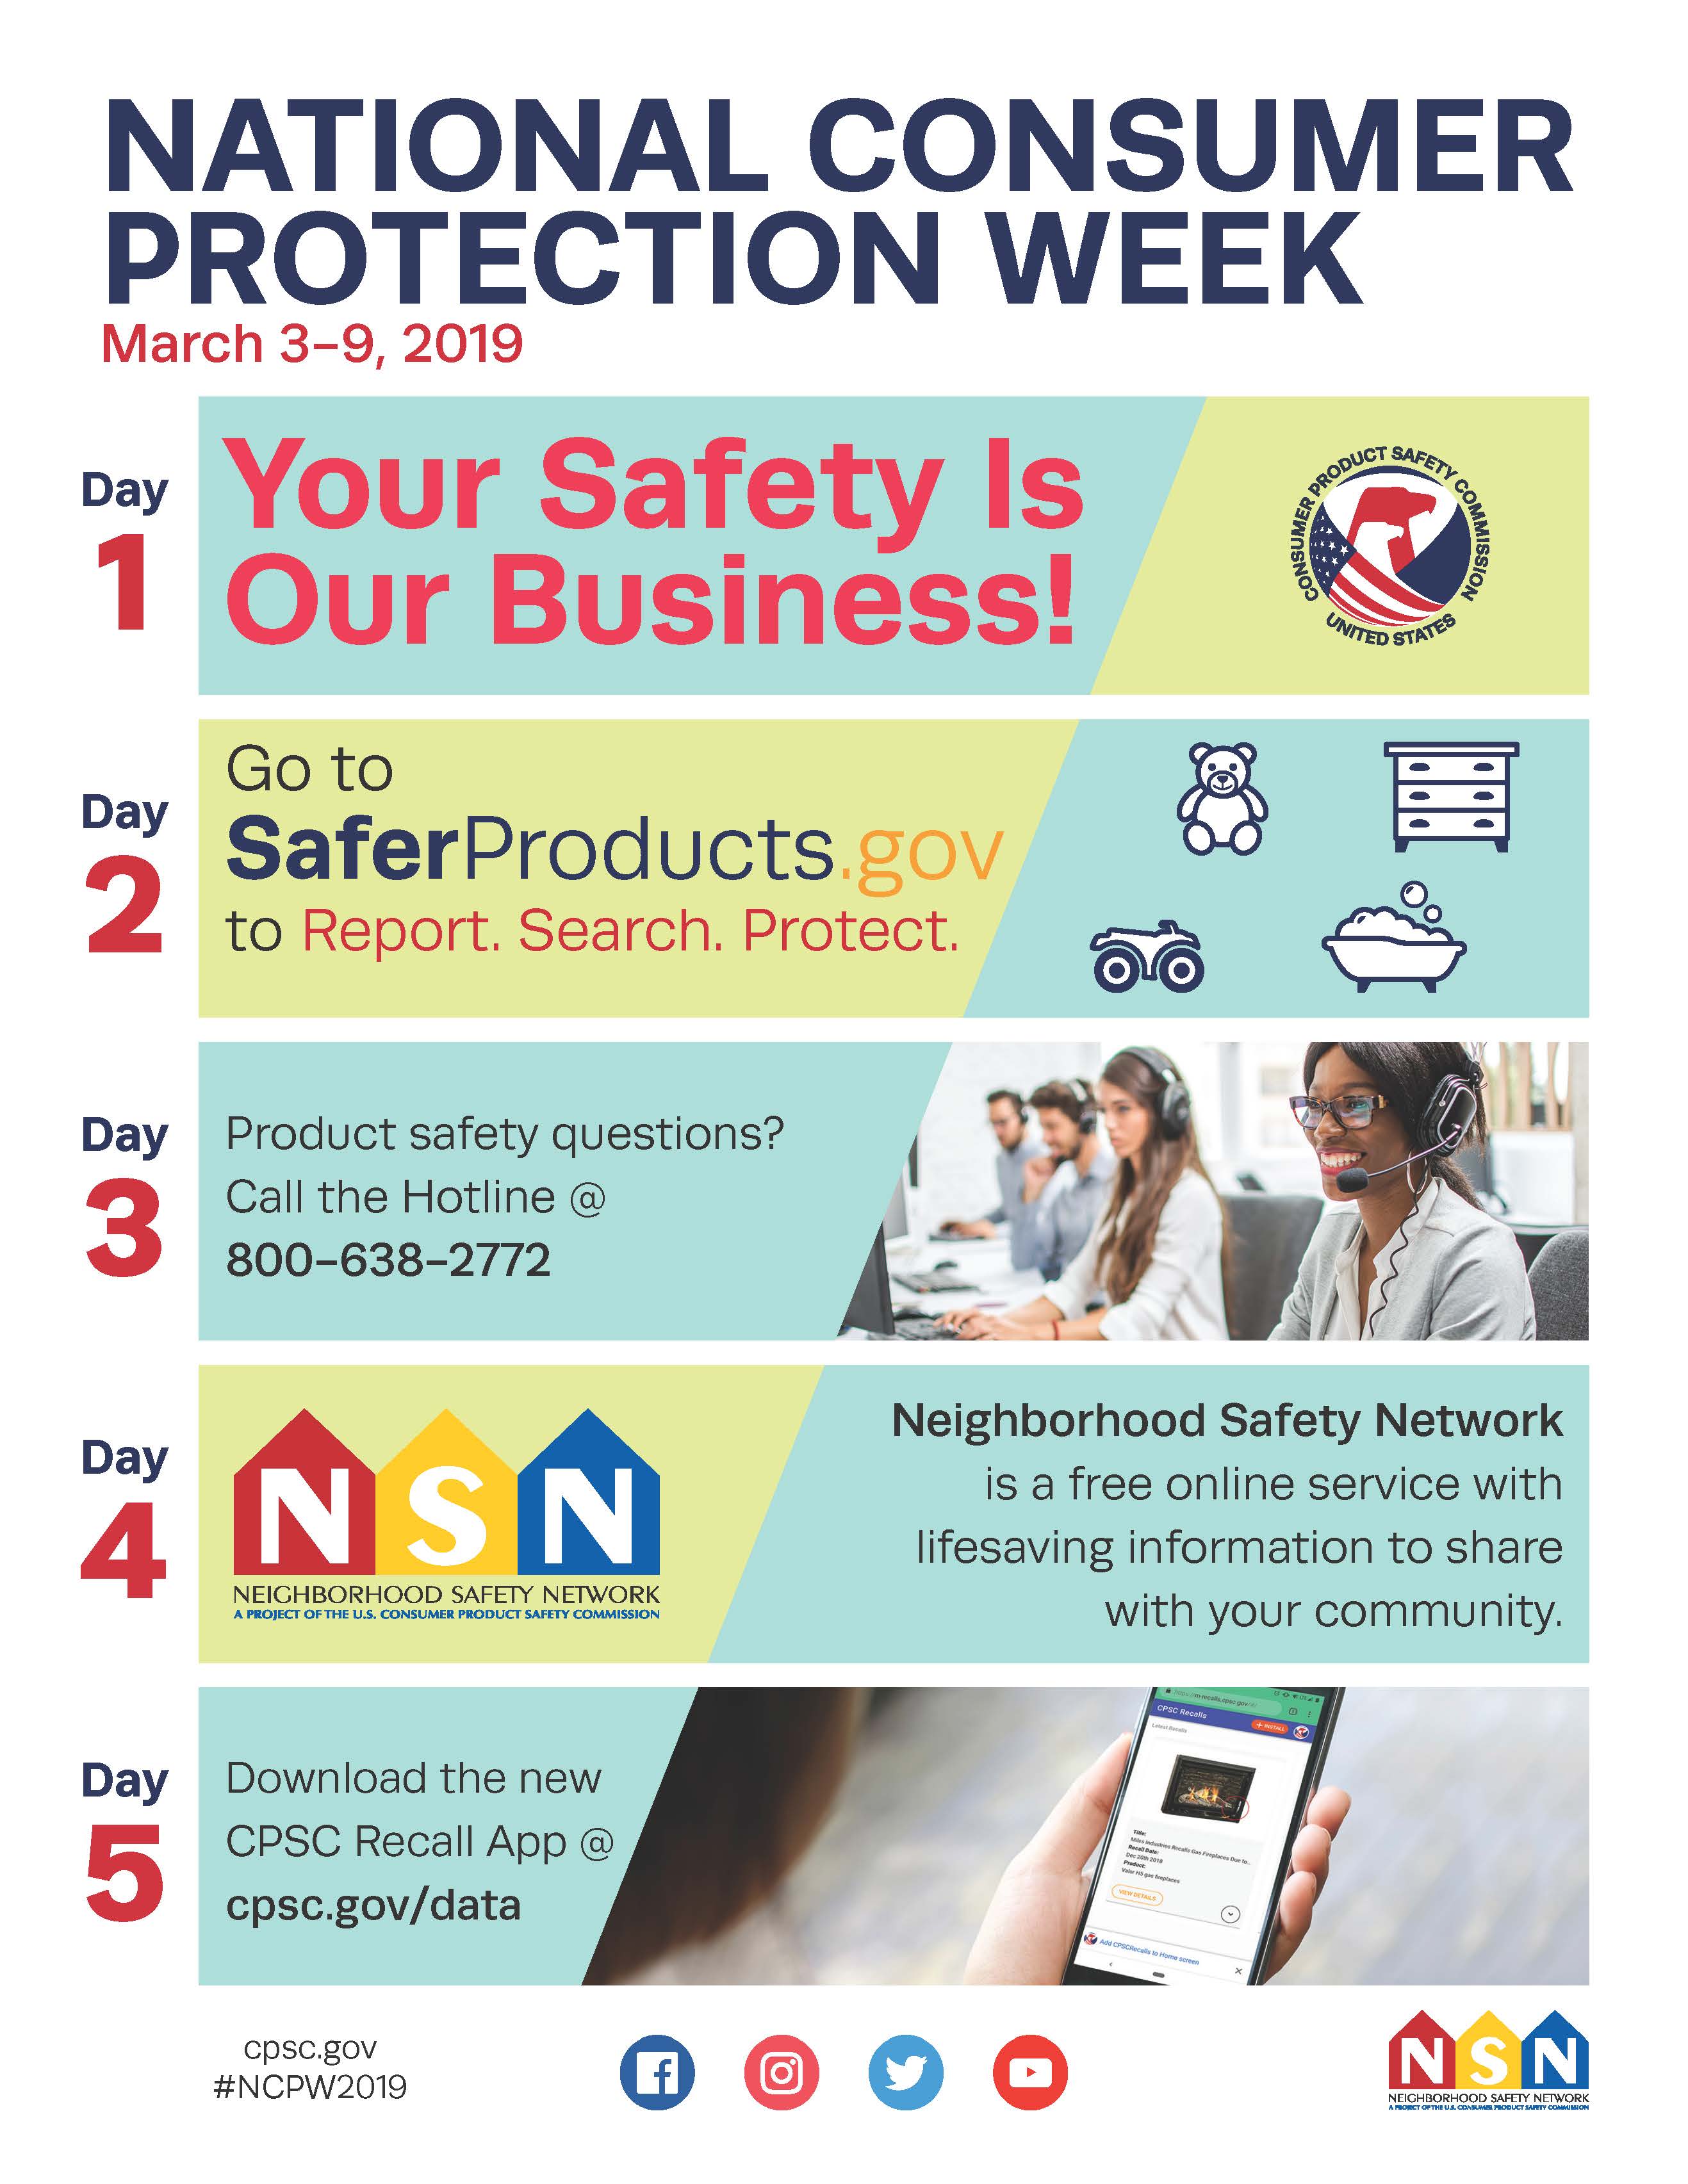 consumer protection posters